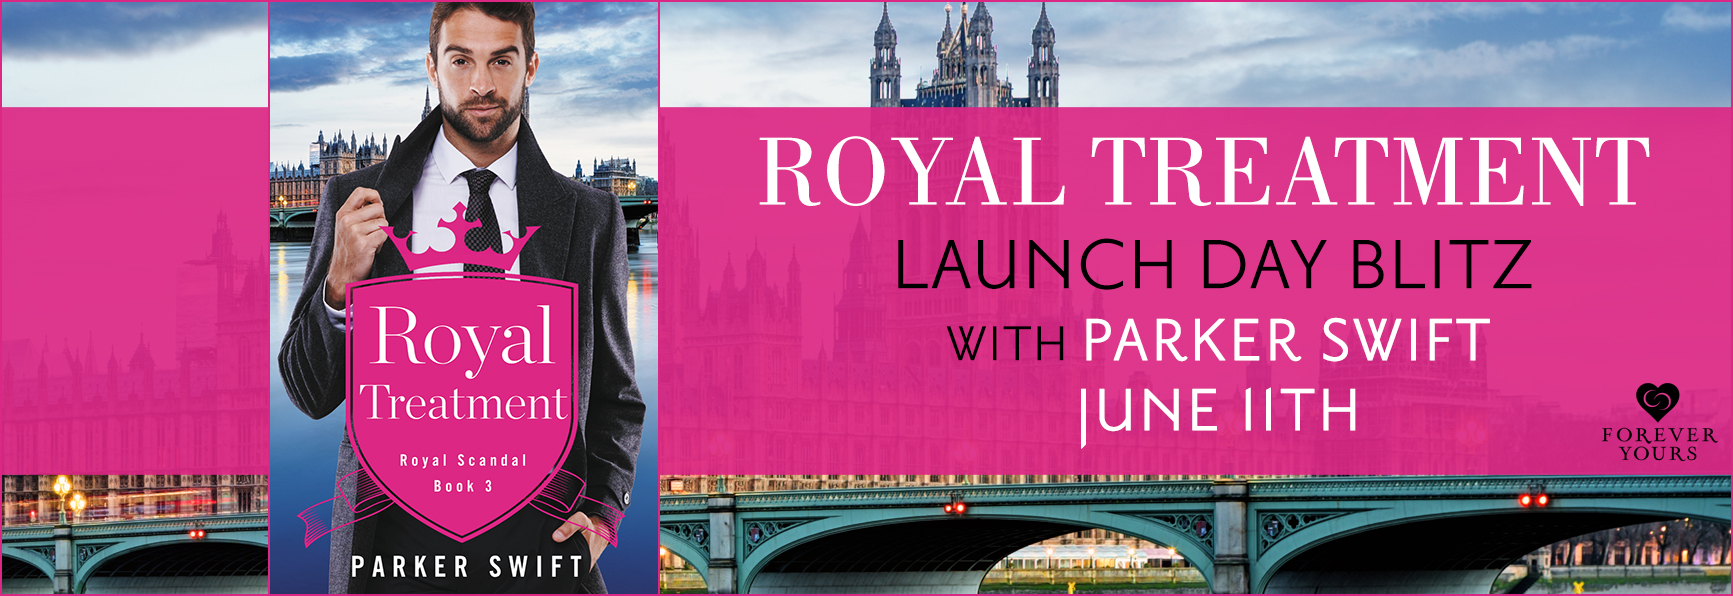 Excerpt and Giveaway: Royal Treatment by Parker Swift